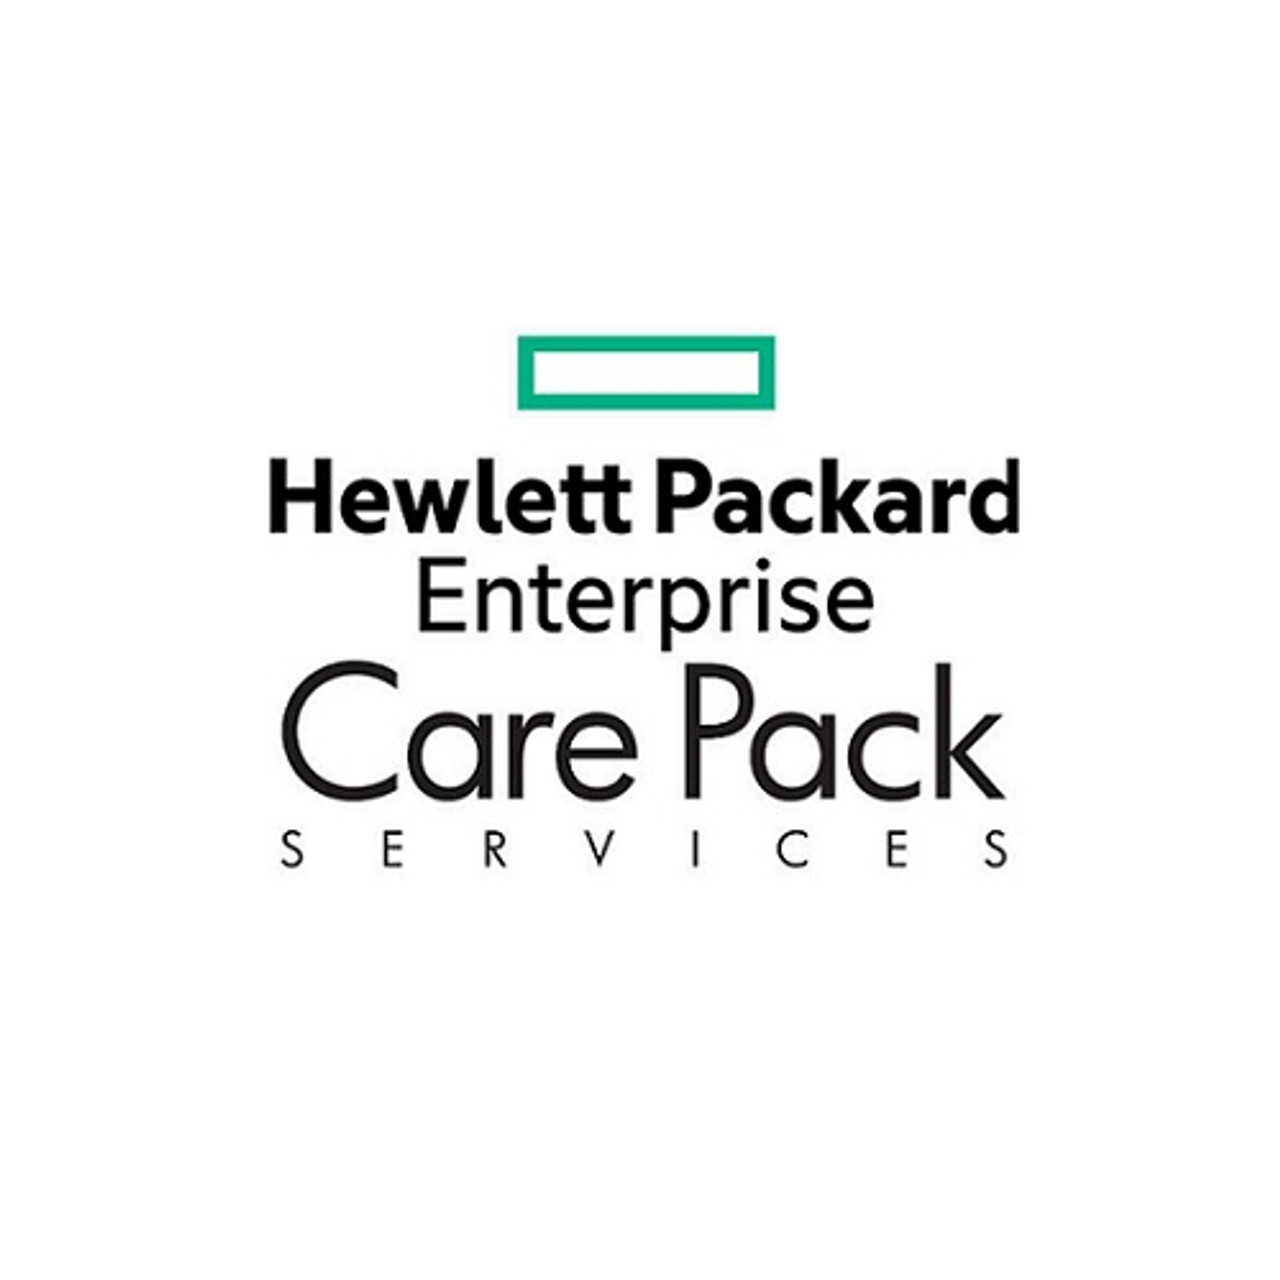 HPE 2 Years Post Warranty Tech Care, Critical D2000 Enclosure Service